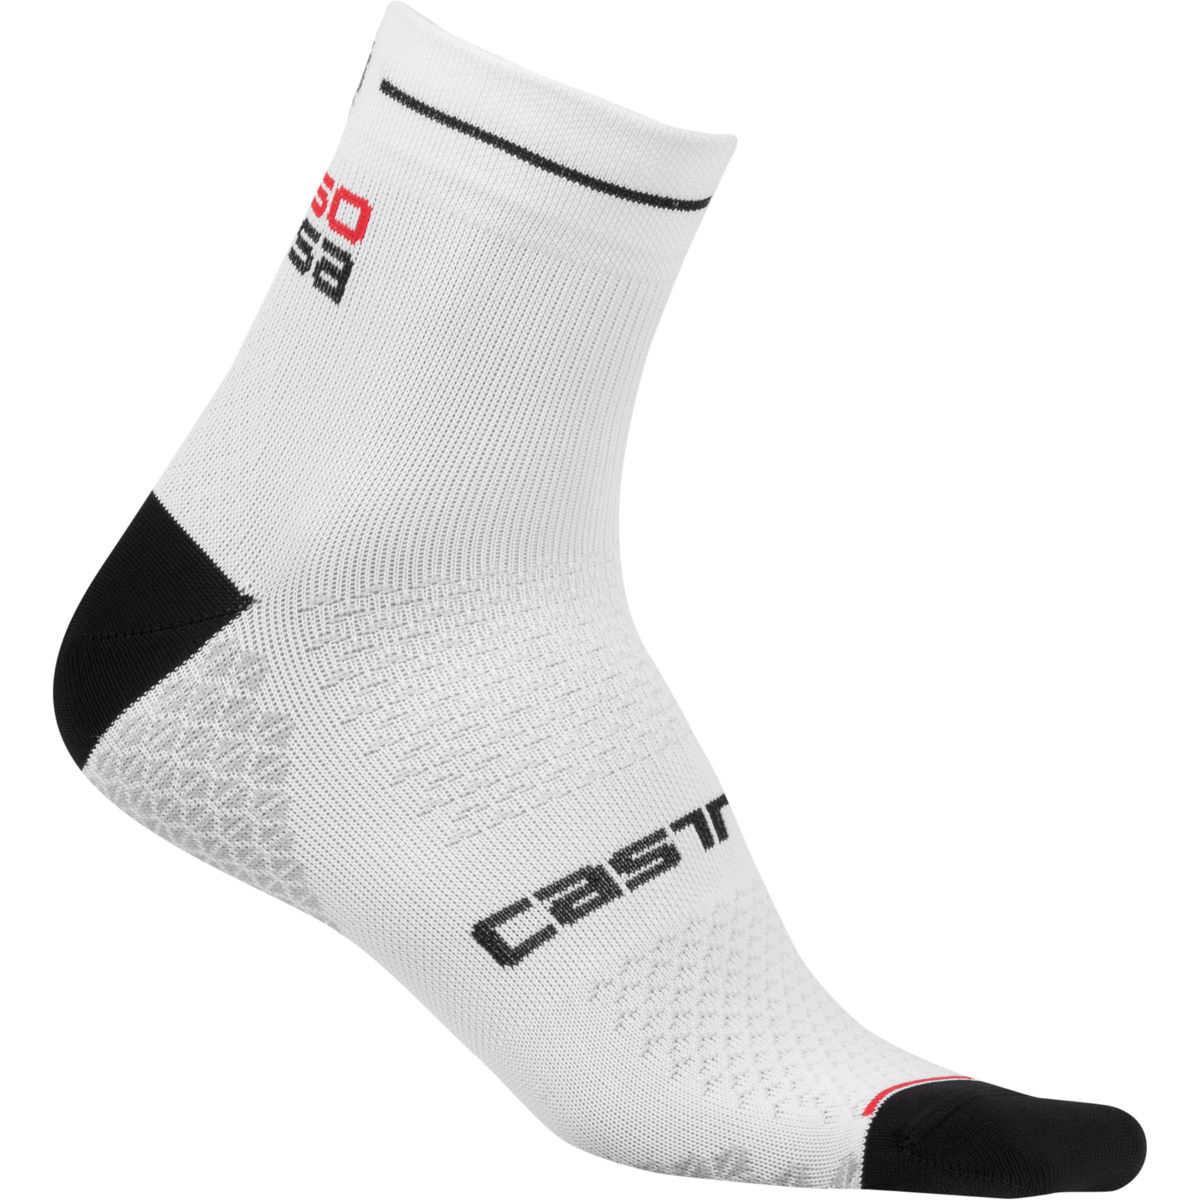 Calcetines Castelli Rosa Corsa 2 para mujer - Calcetines